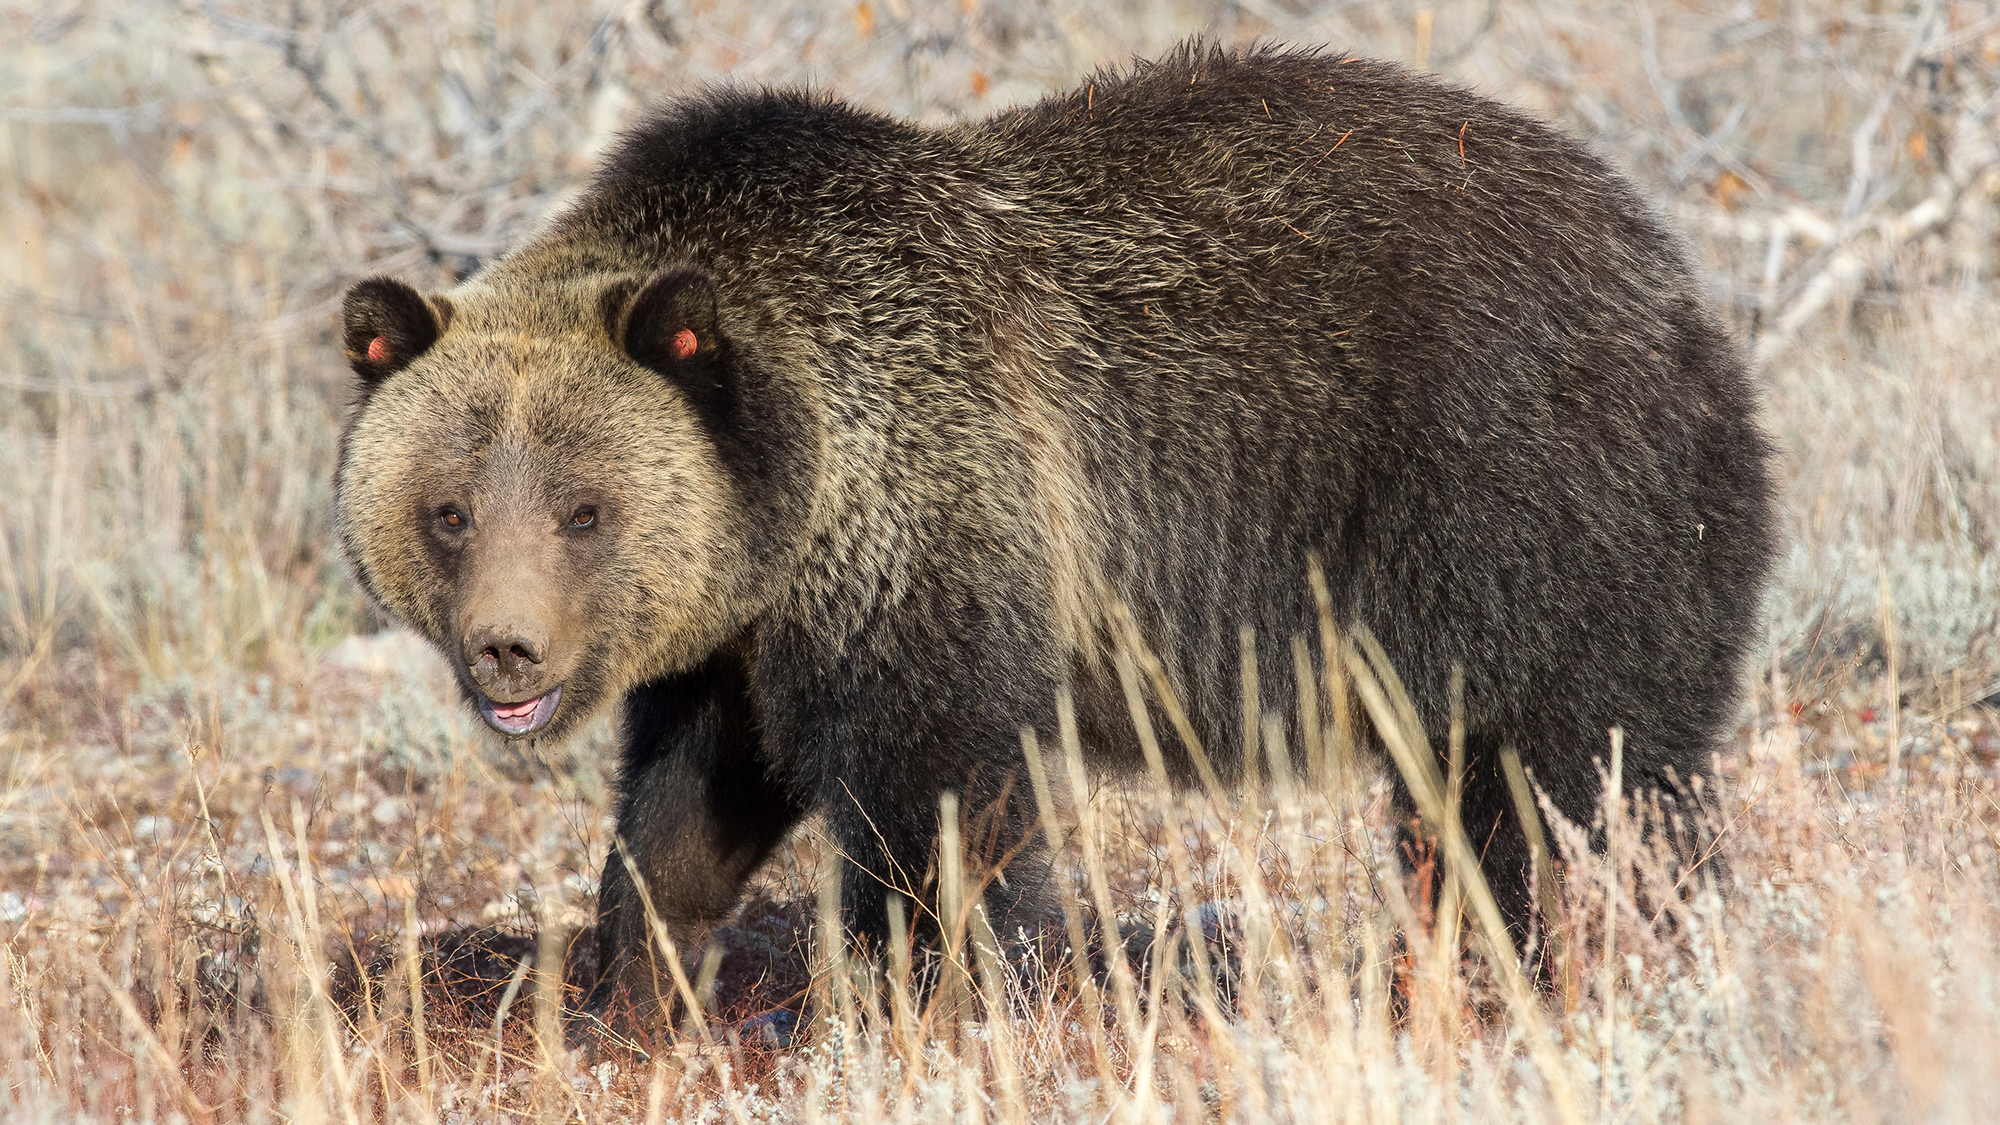 How Are Problem Grizzly Bears Relocated in the West?